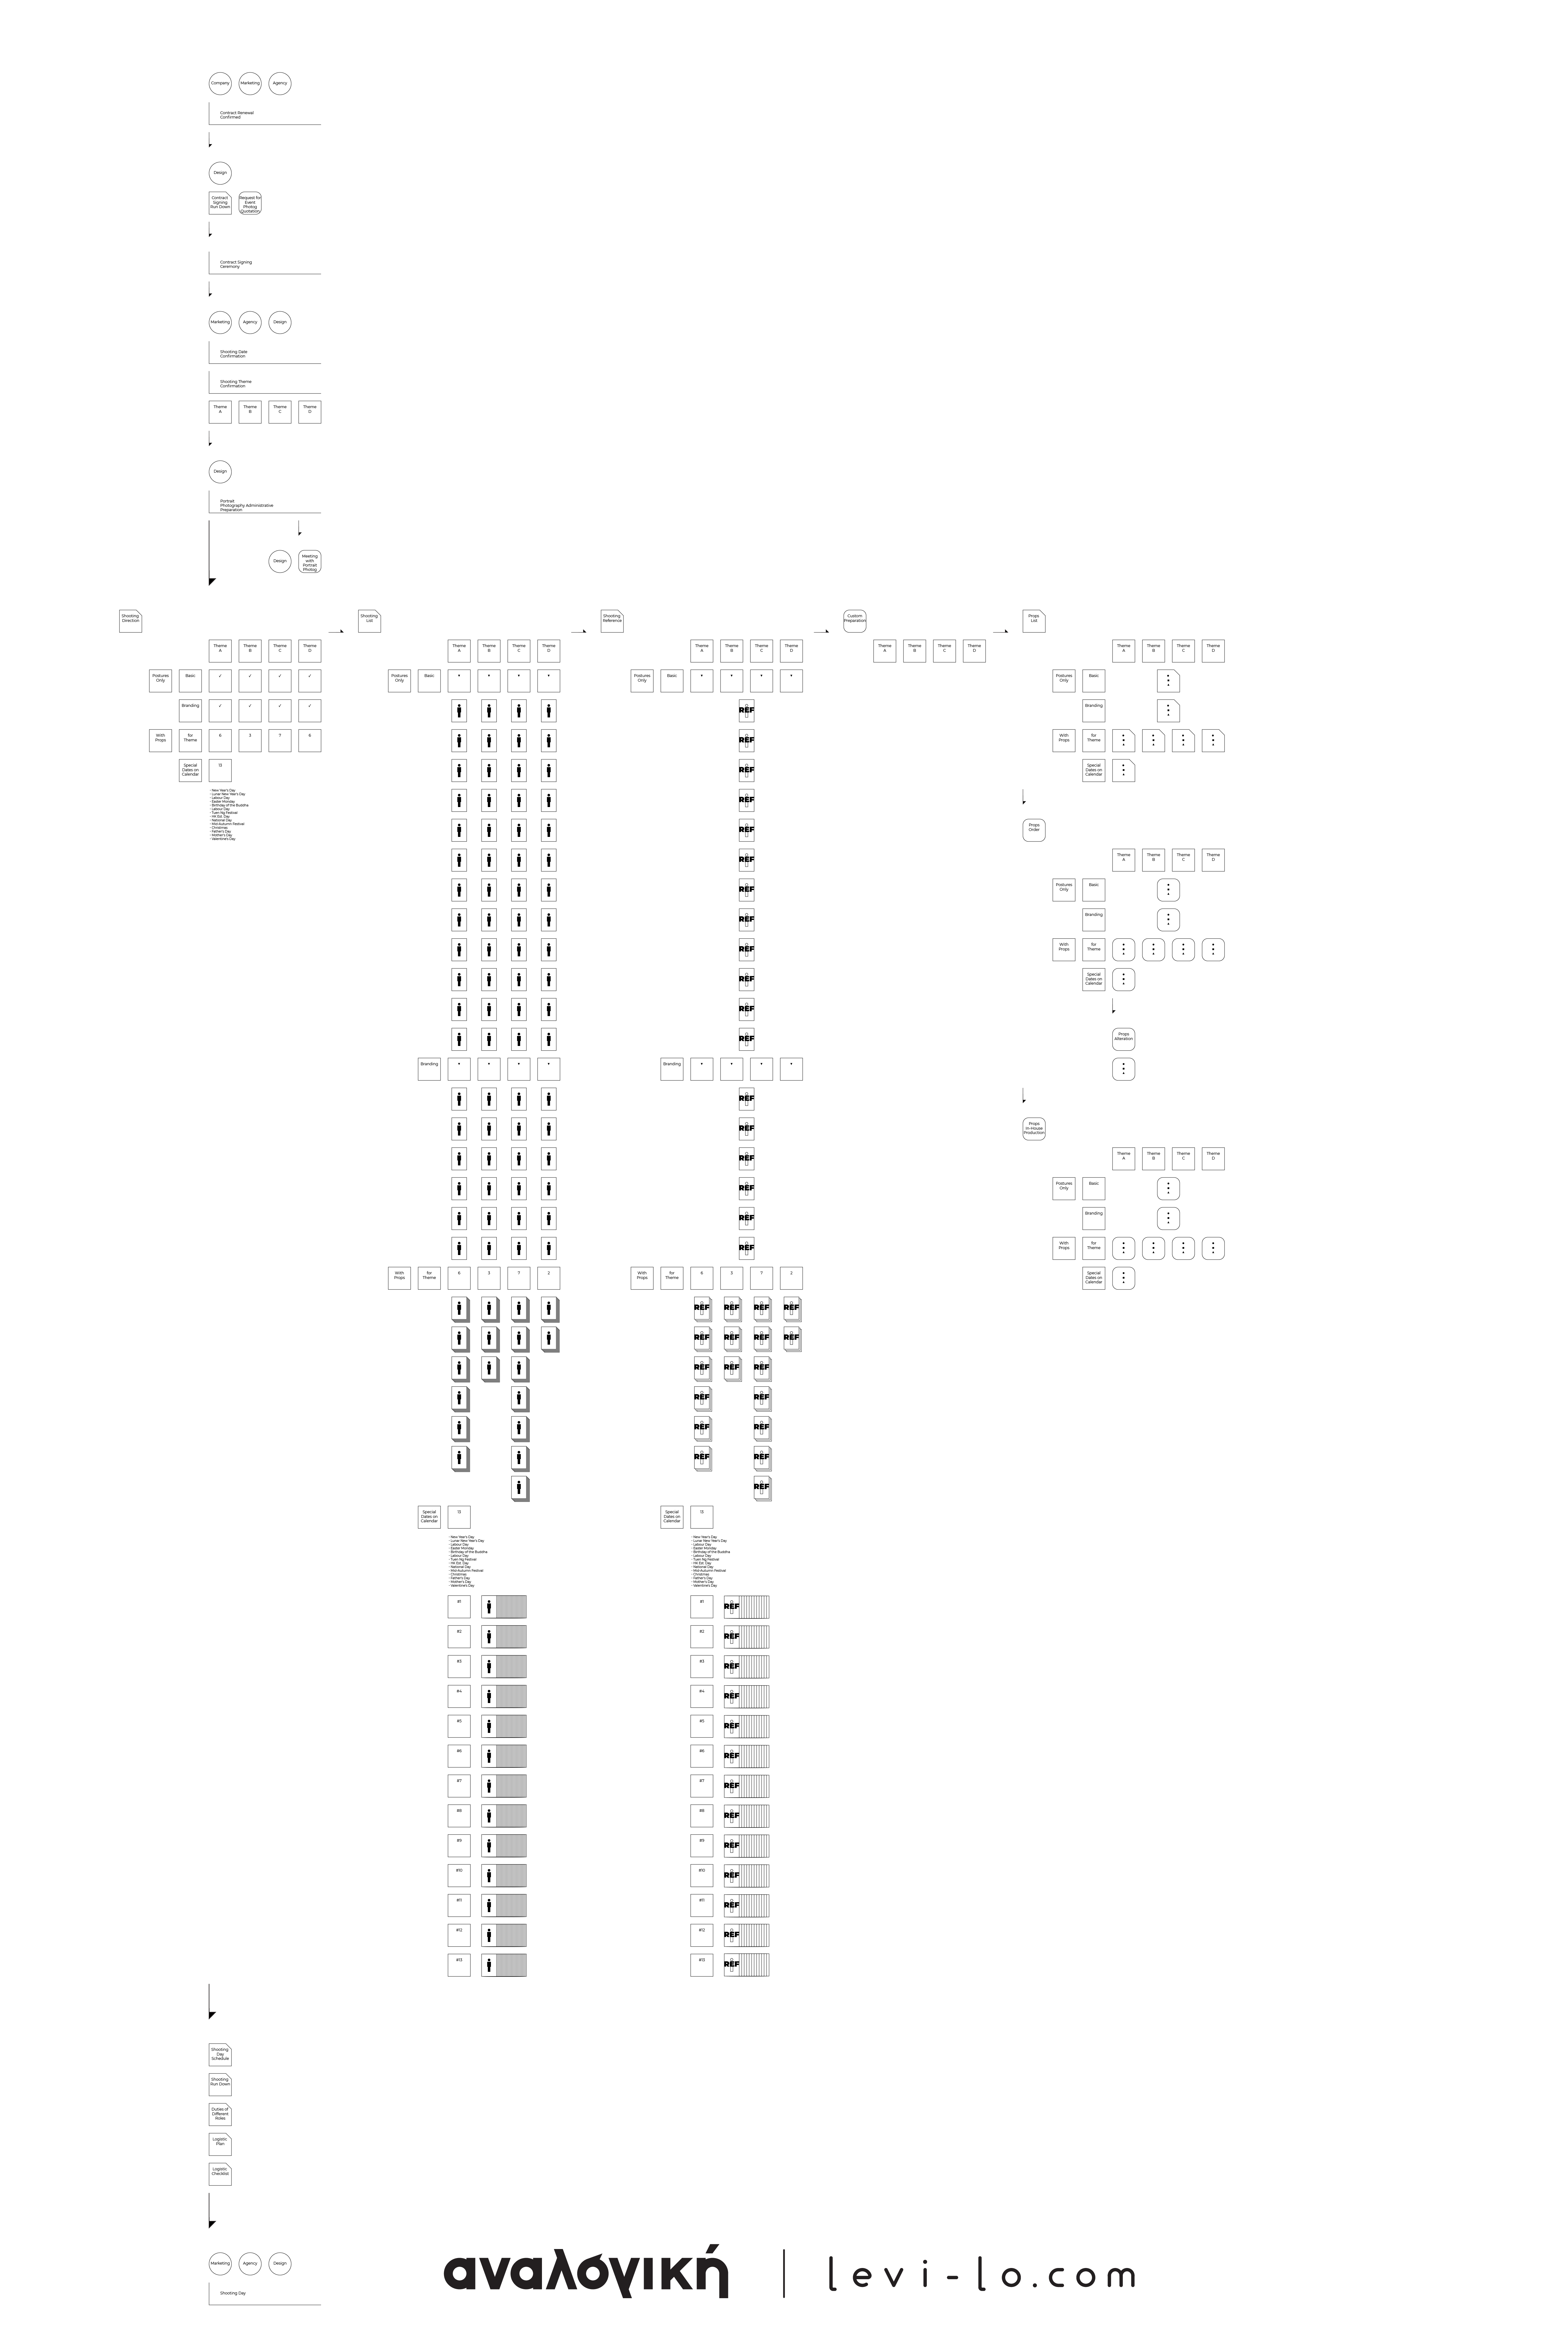 Infographic of Production Flow of Felix Wong Portraits, designed by Levi Lo